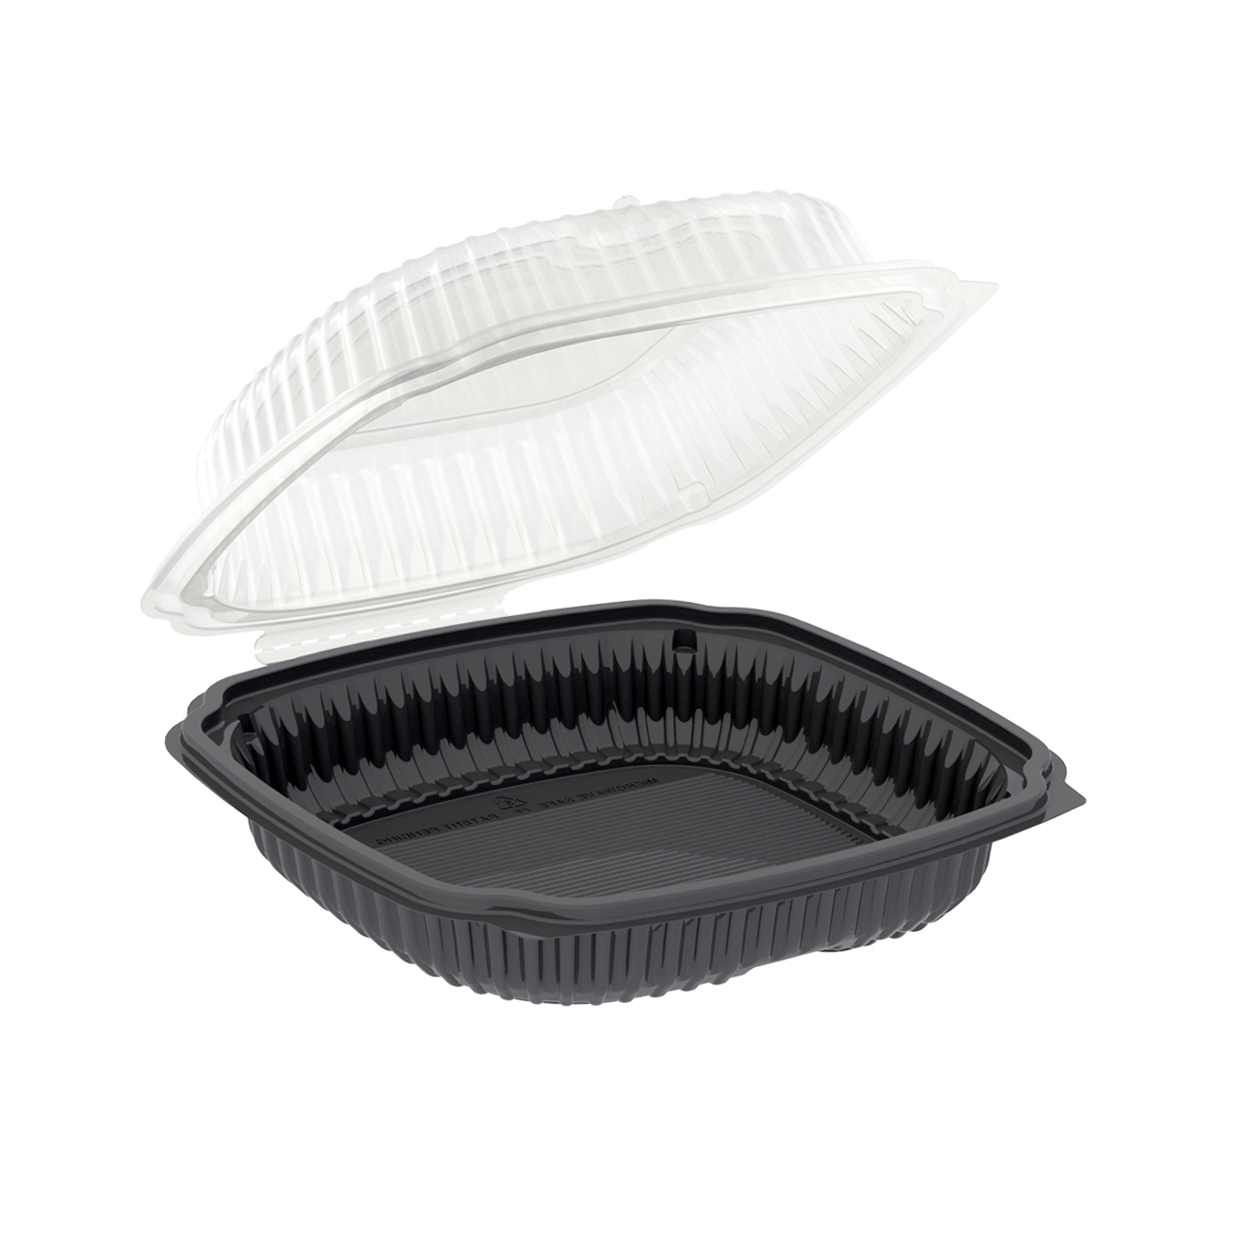 Product sp*62971: Large 1-Comp,Microwave  Carryout (100) 9"x9"x3"